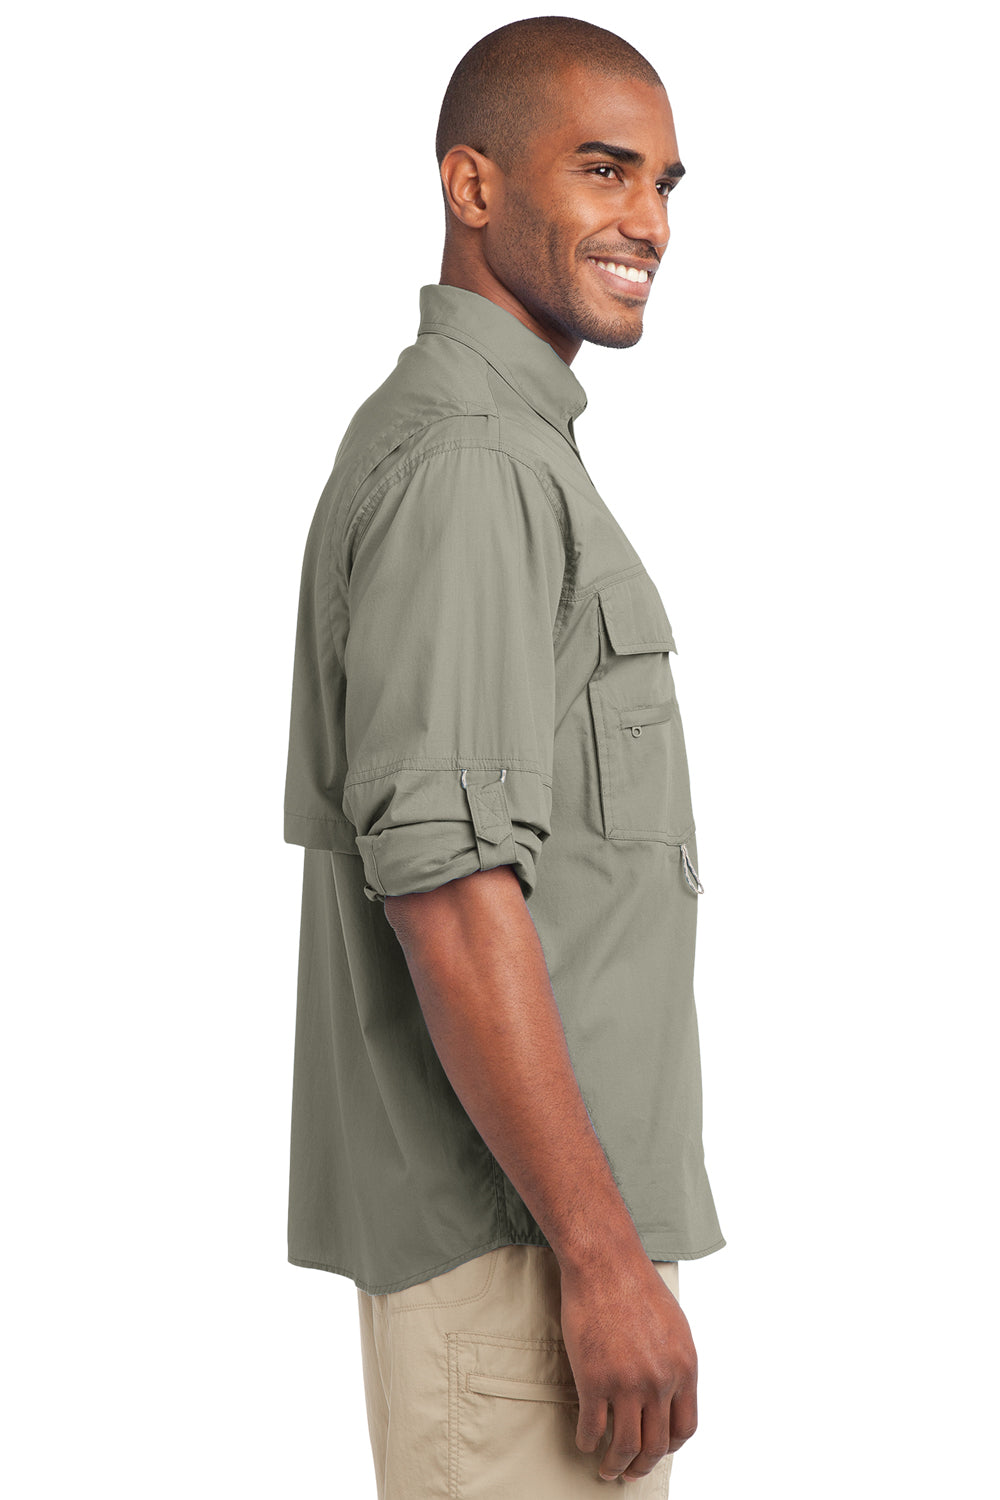 Eddie Bauer EB606 Mens Fishing Long Sleeve Button Down Shirt w/ Double Pockets Driftwood Side